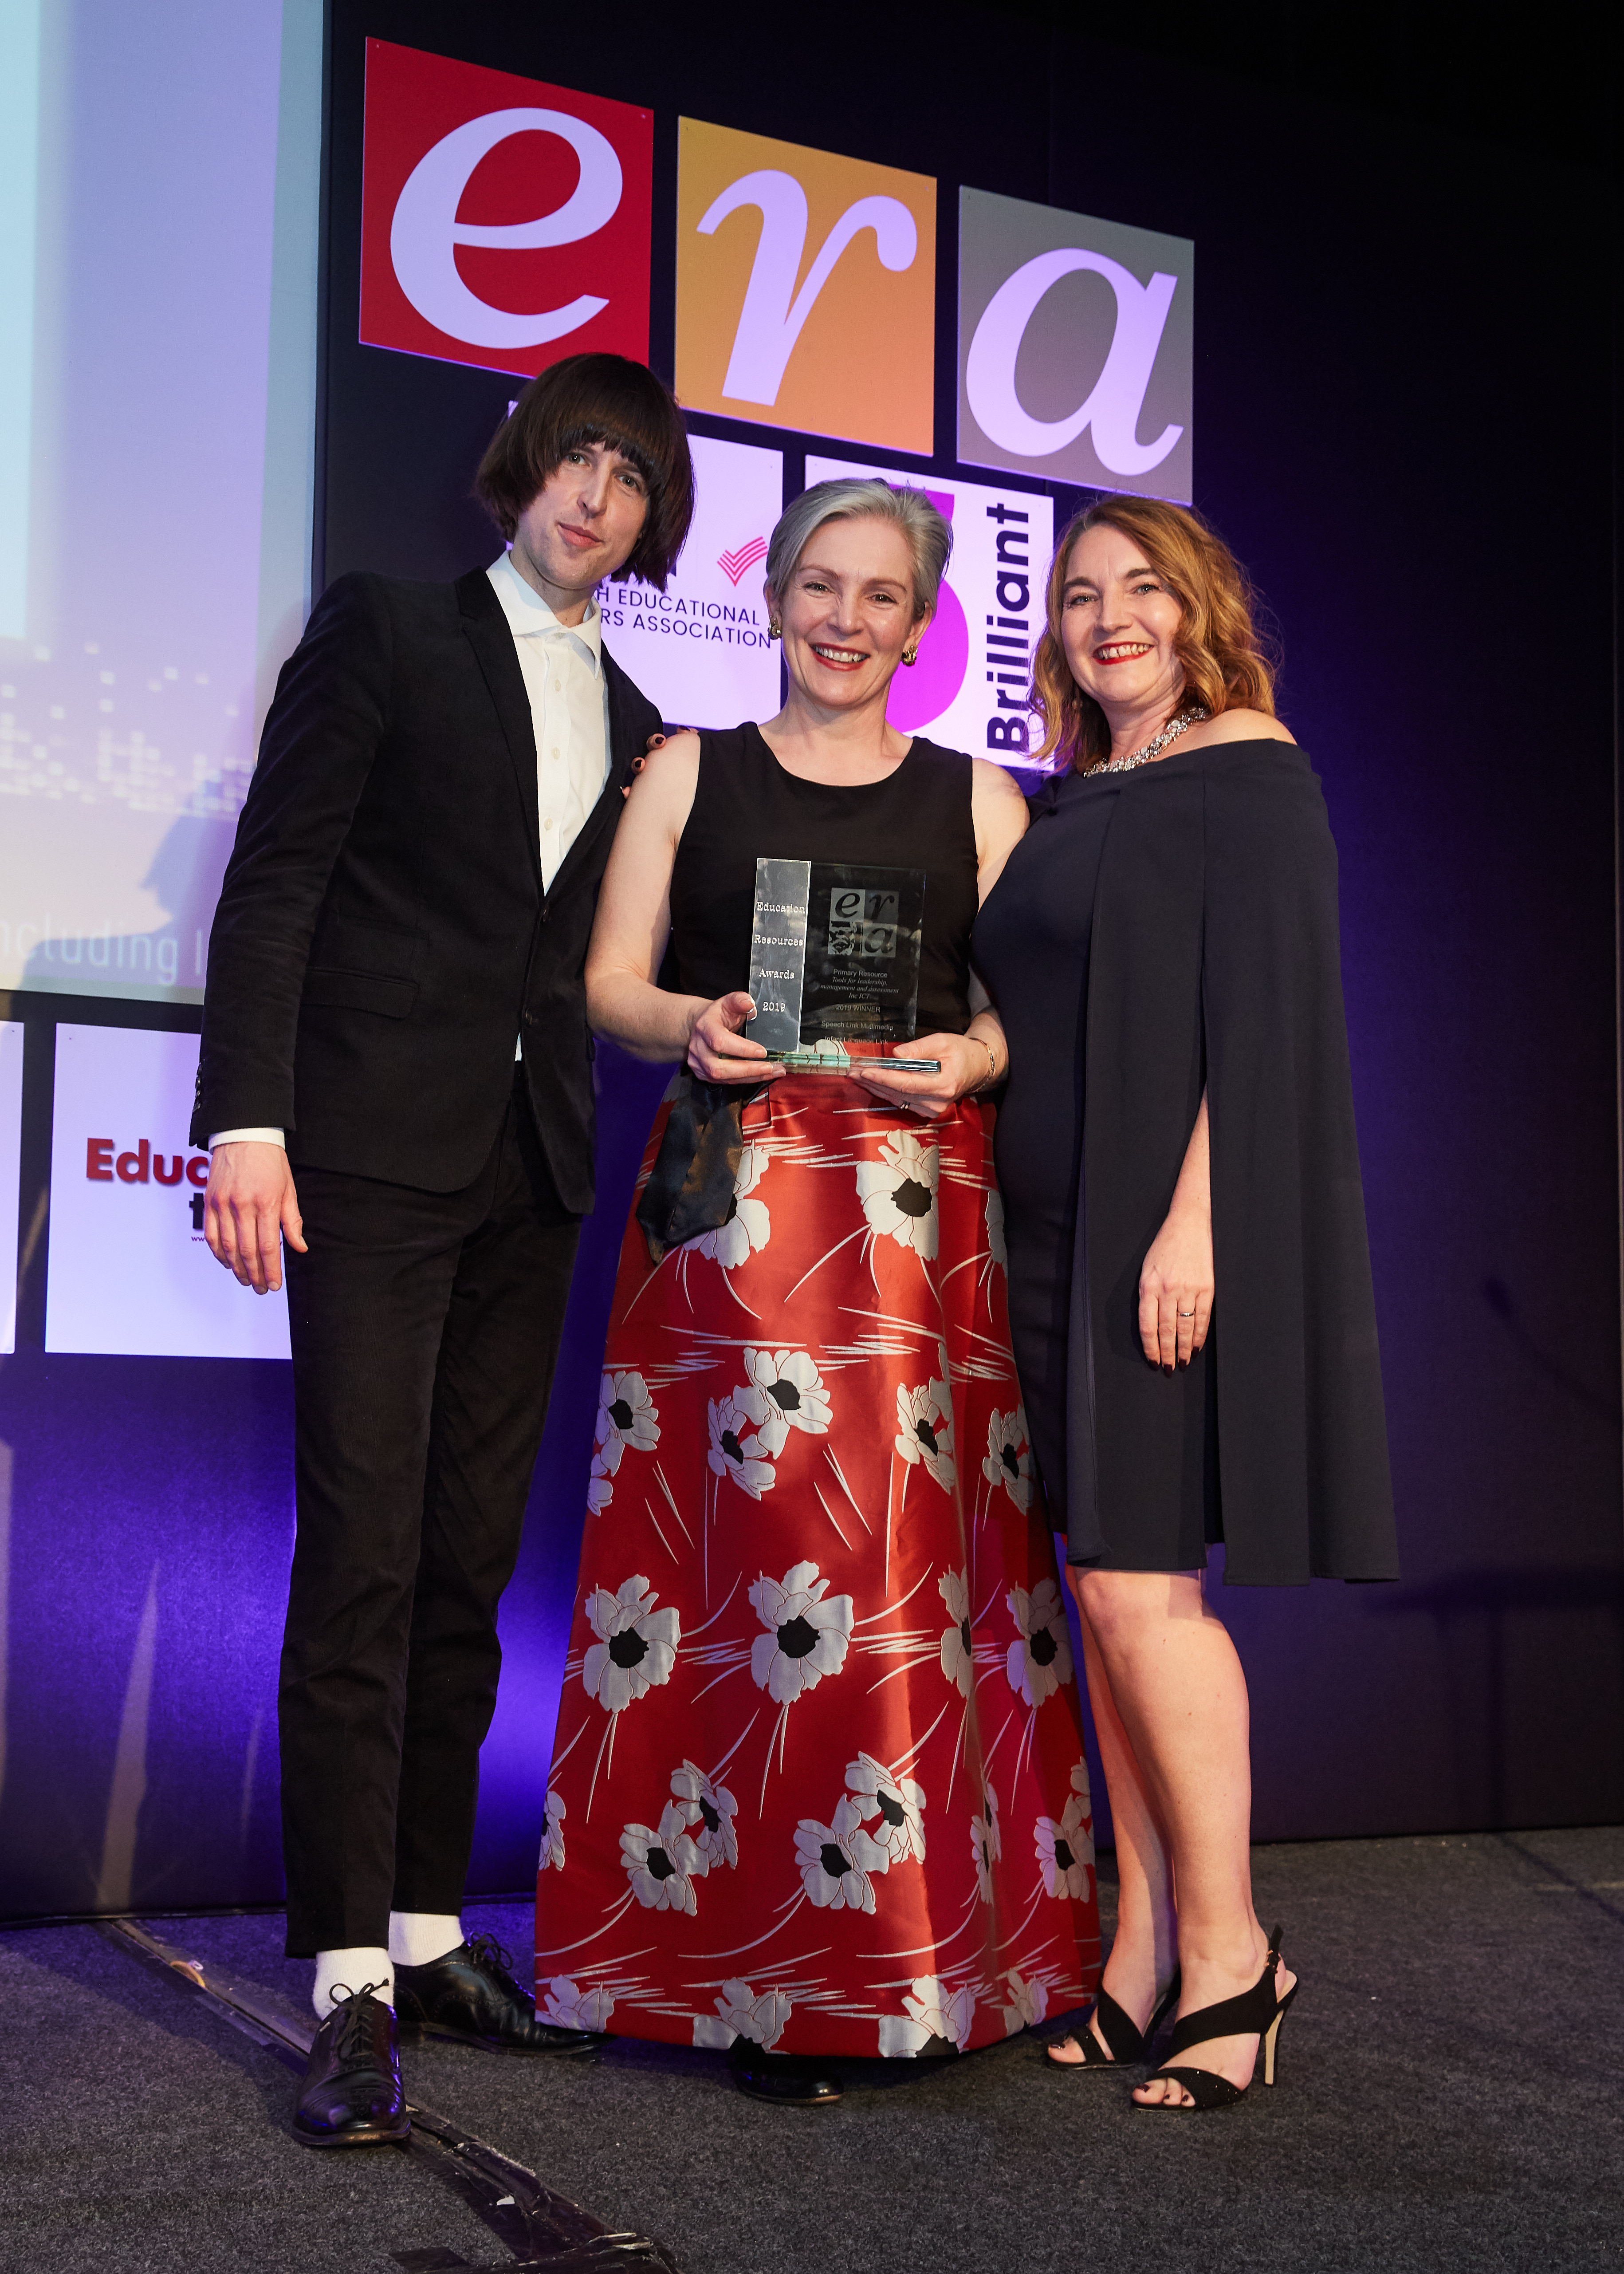 Infant Language Link wins at the Education Resources Awards 2019